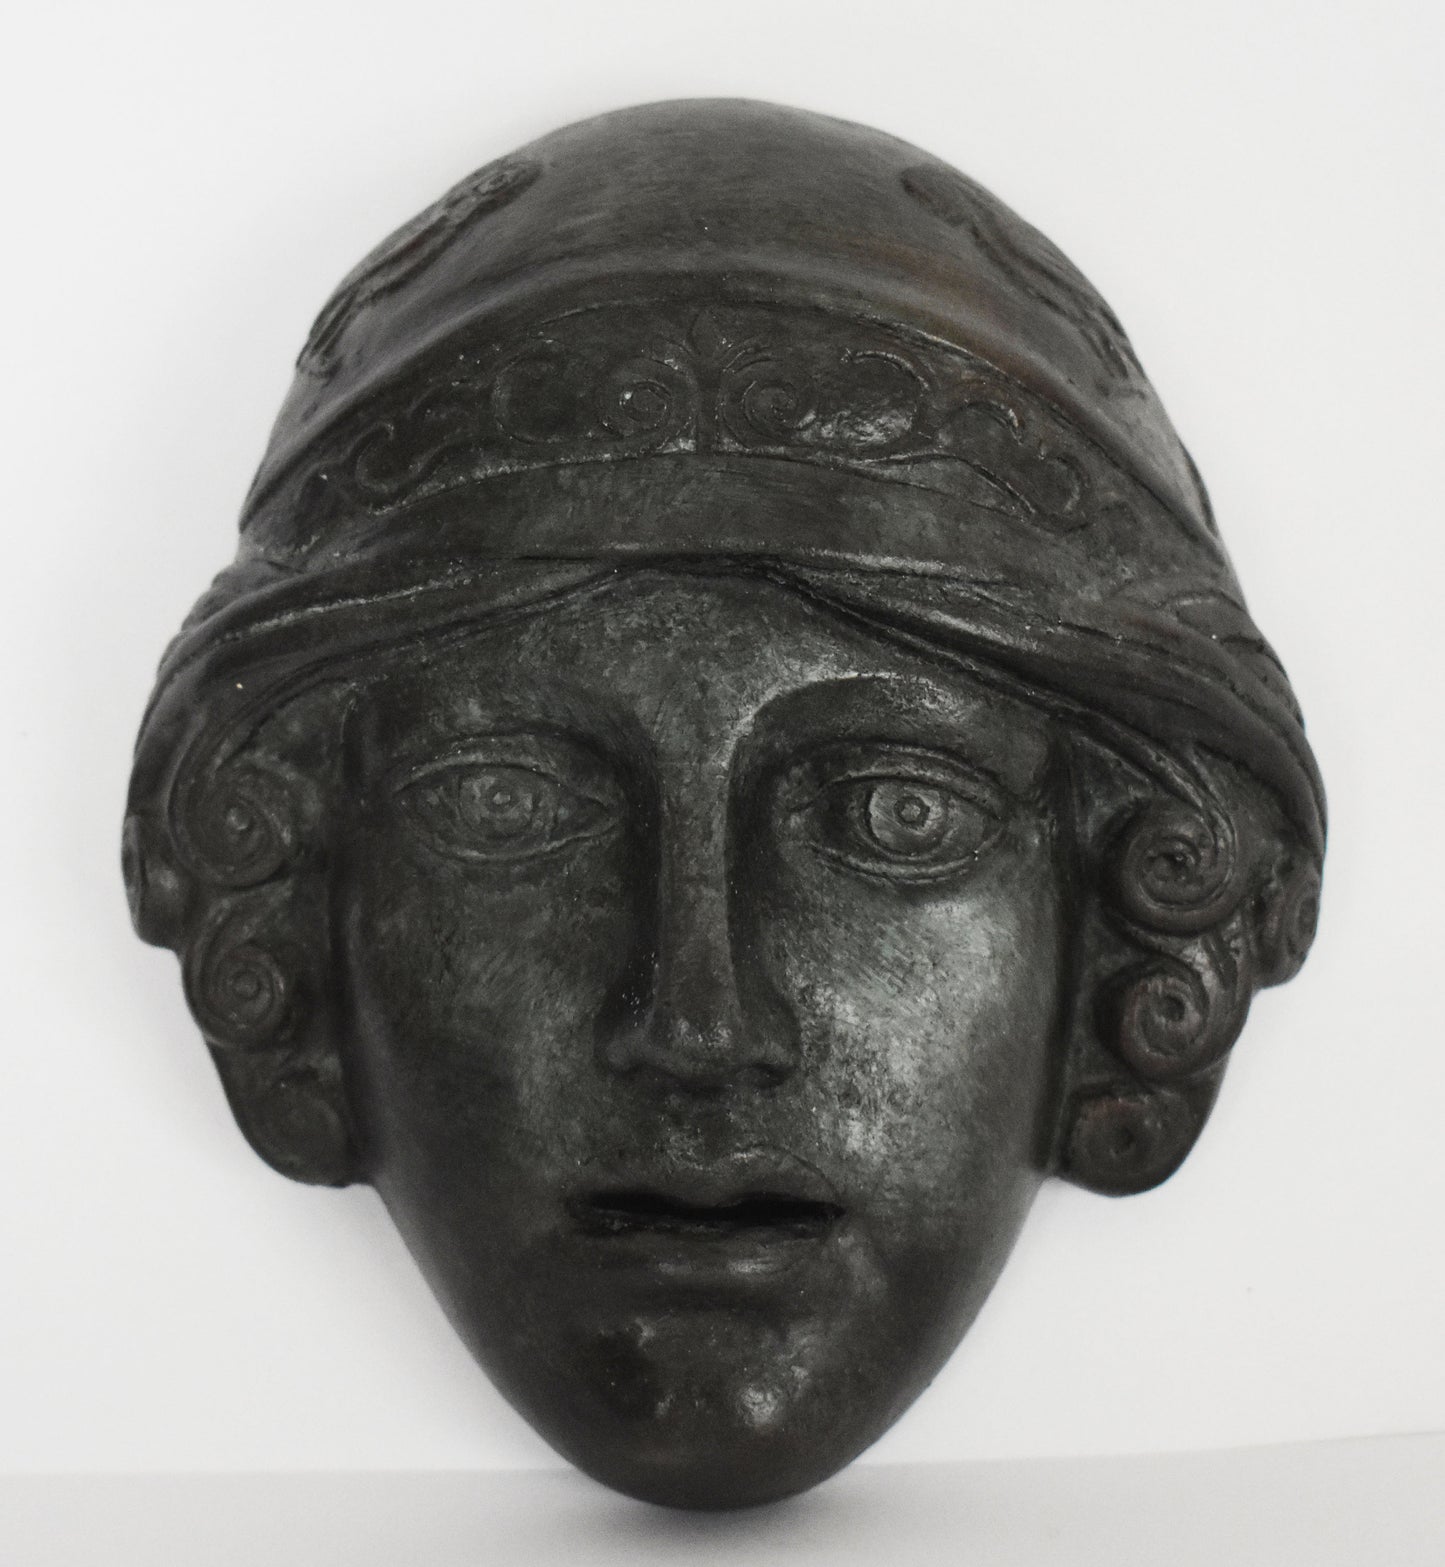 Athena Mask - Goddes of Wisdom, Strength, Strategy, Courage, Inspiration, Arts, Crafts - Small - Wall Decoration - Bronze Colour Effect